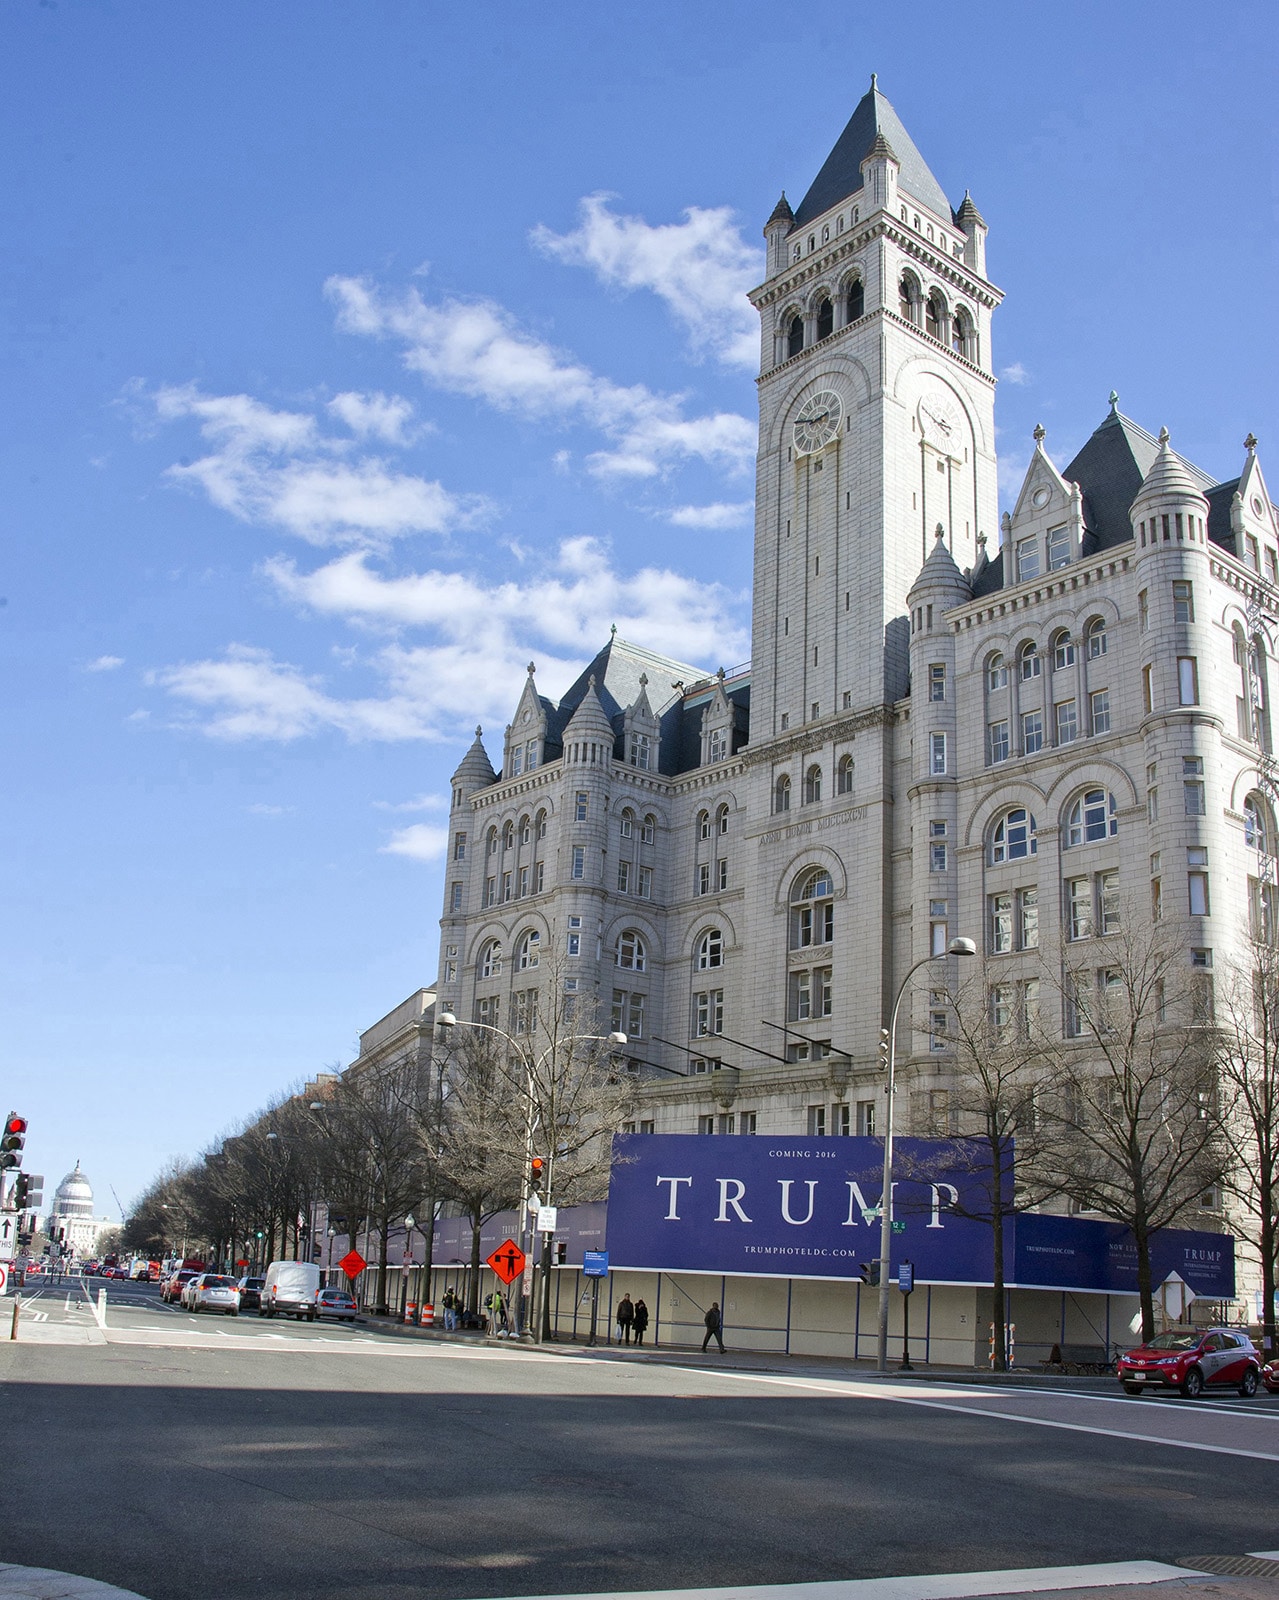 Inspector General Report Implies Trump Violated Constitution with Hotel Lease